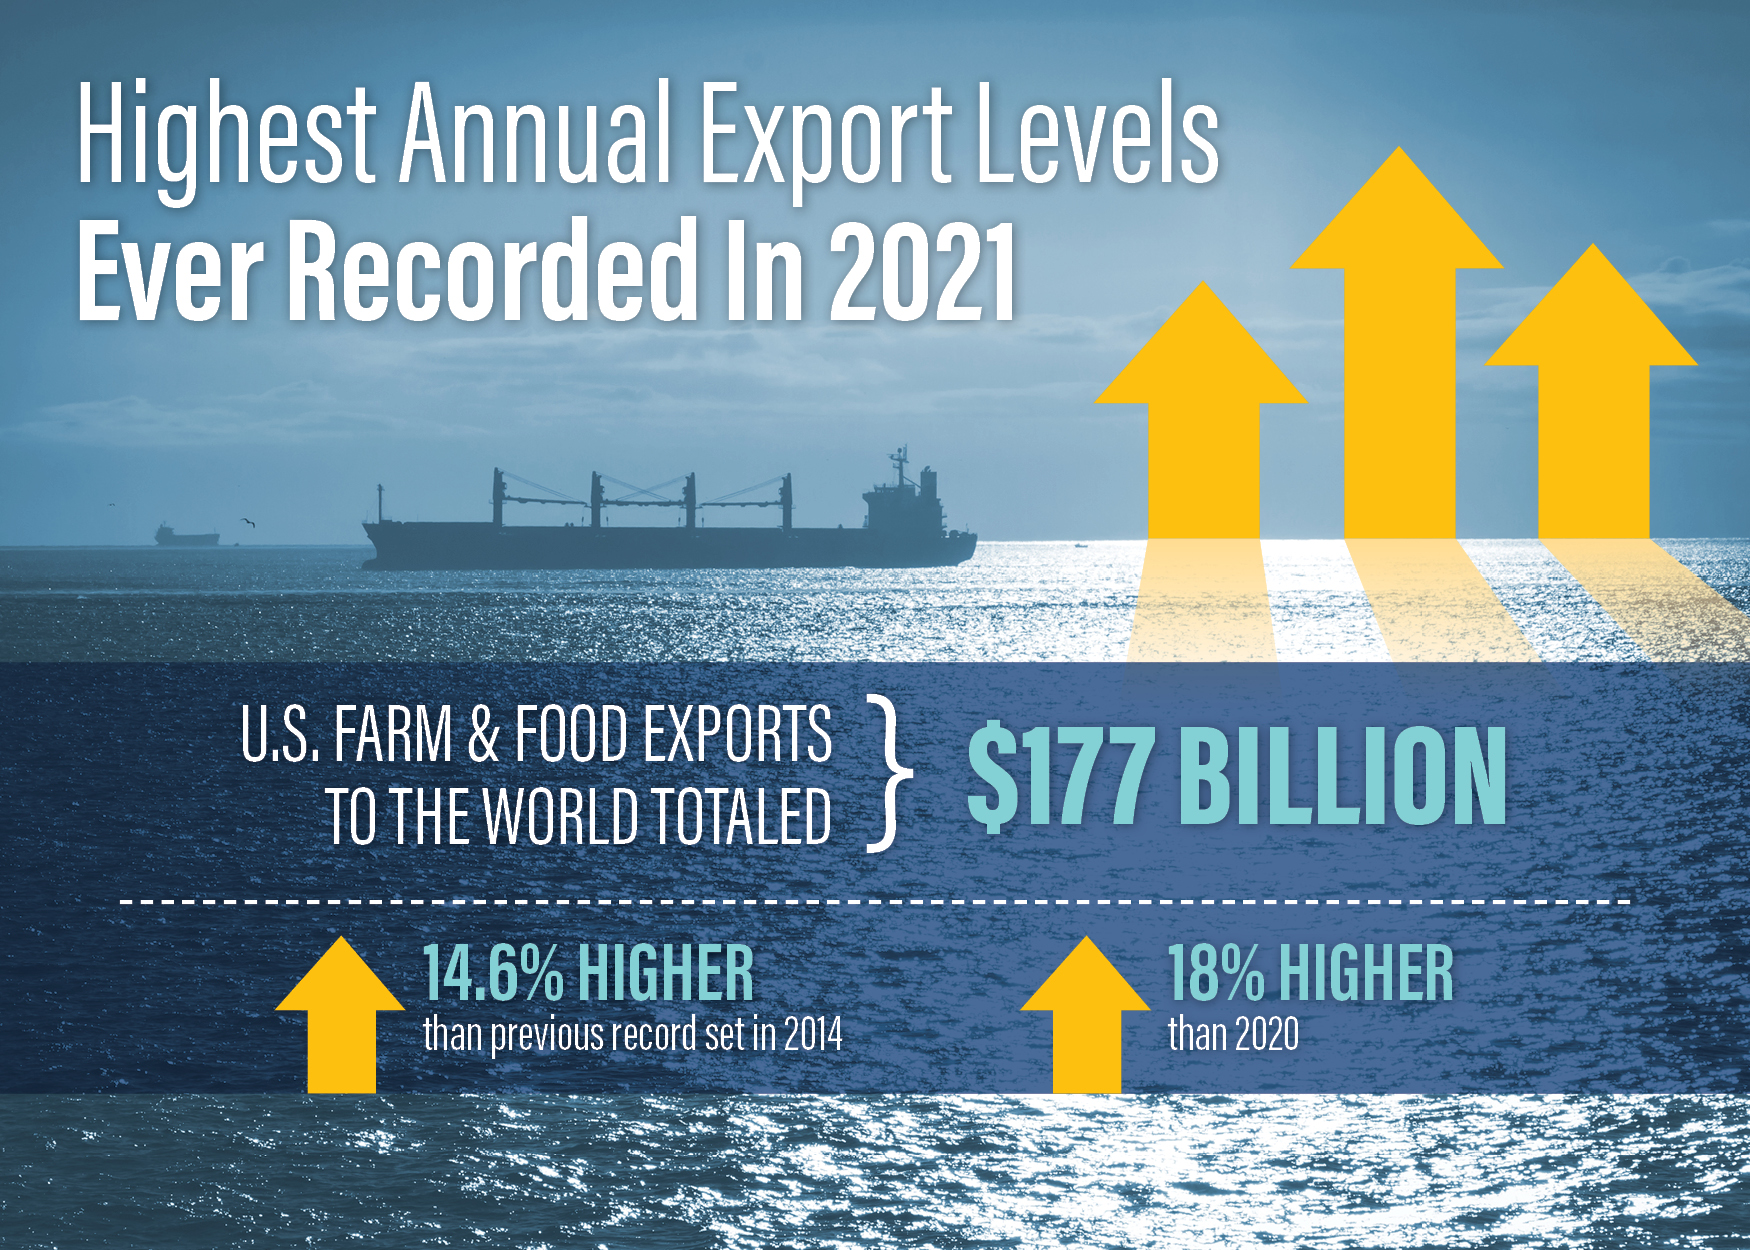  Highest Annual Export Levels Ever Recorded in 2021